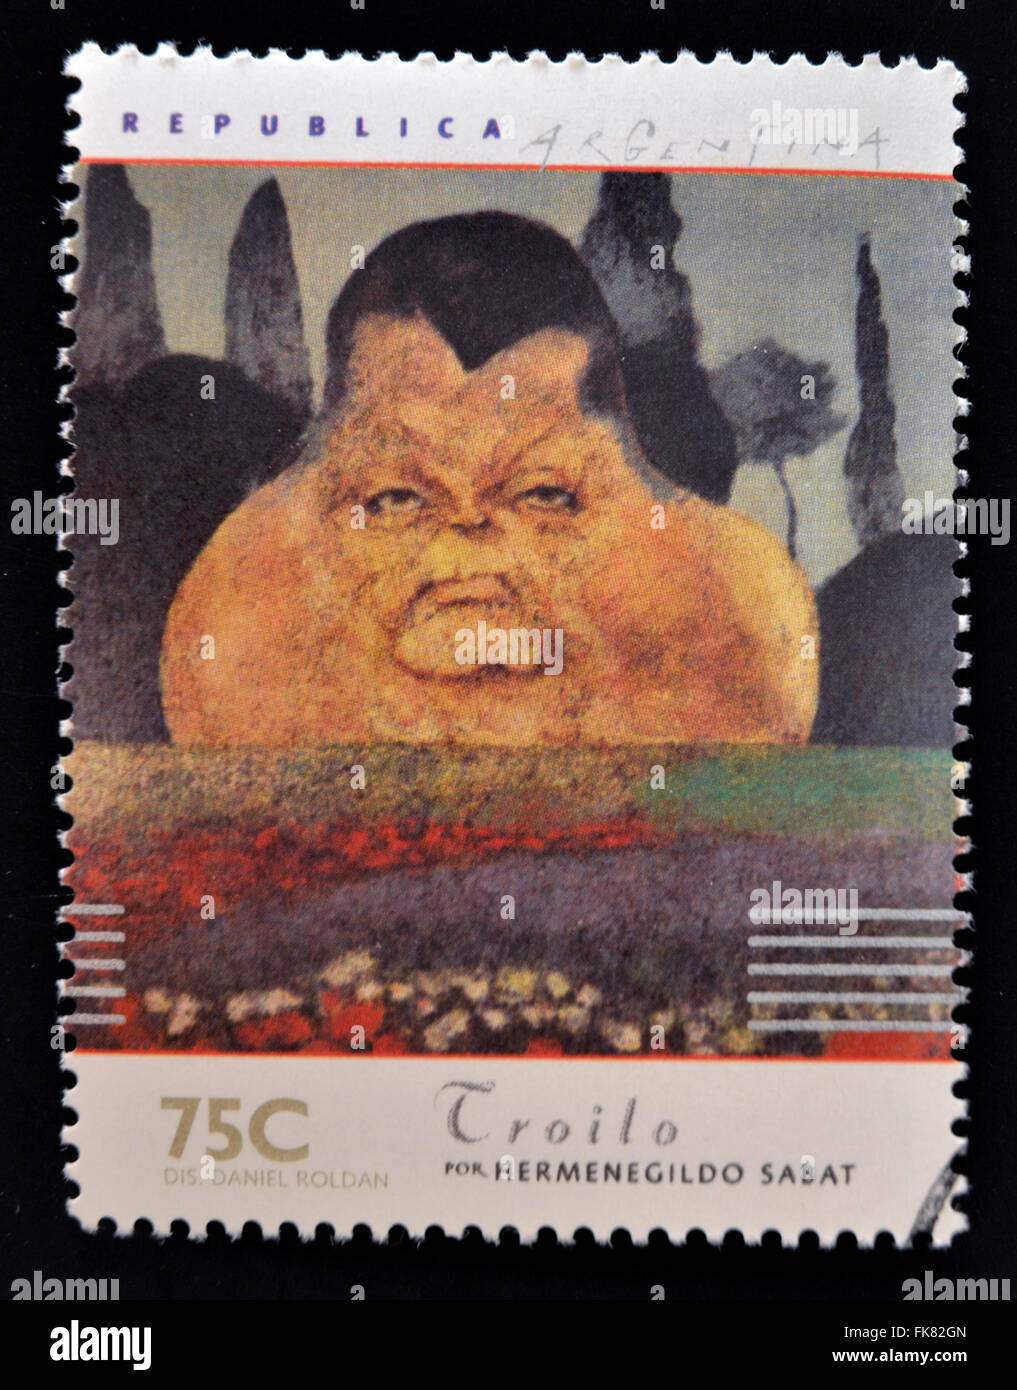 ARGENTINA - CIRCA 1997: A stamp printed in Argentina dedicated to argentinian musicians, shows Anibal Troilo by Hermenegildo Sab Stock Photo